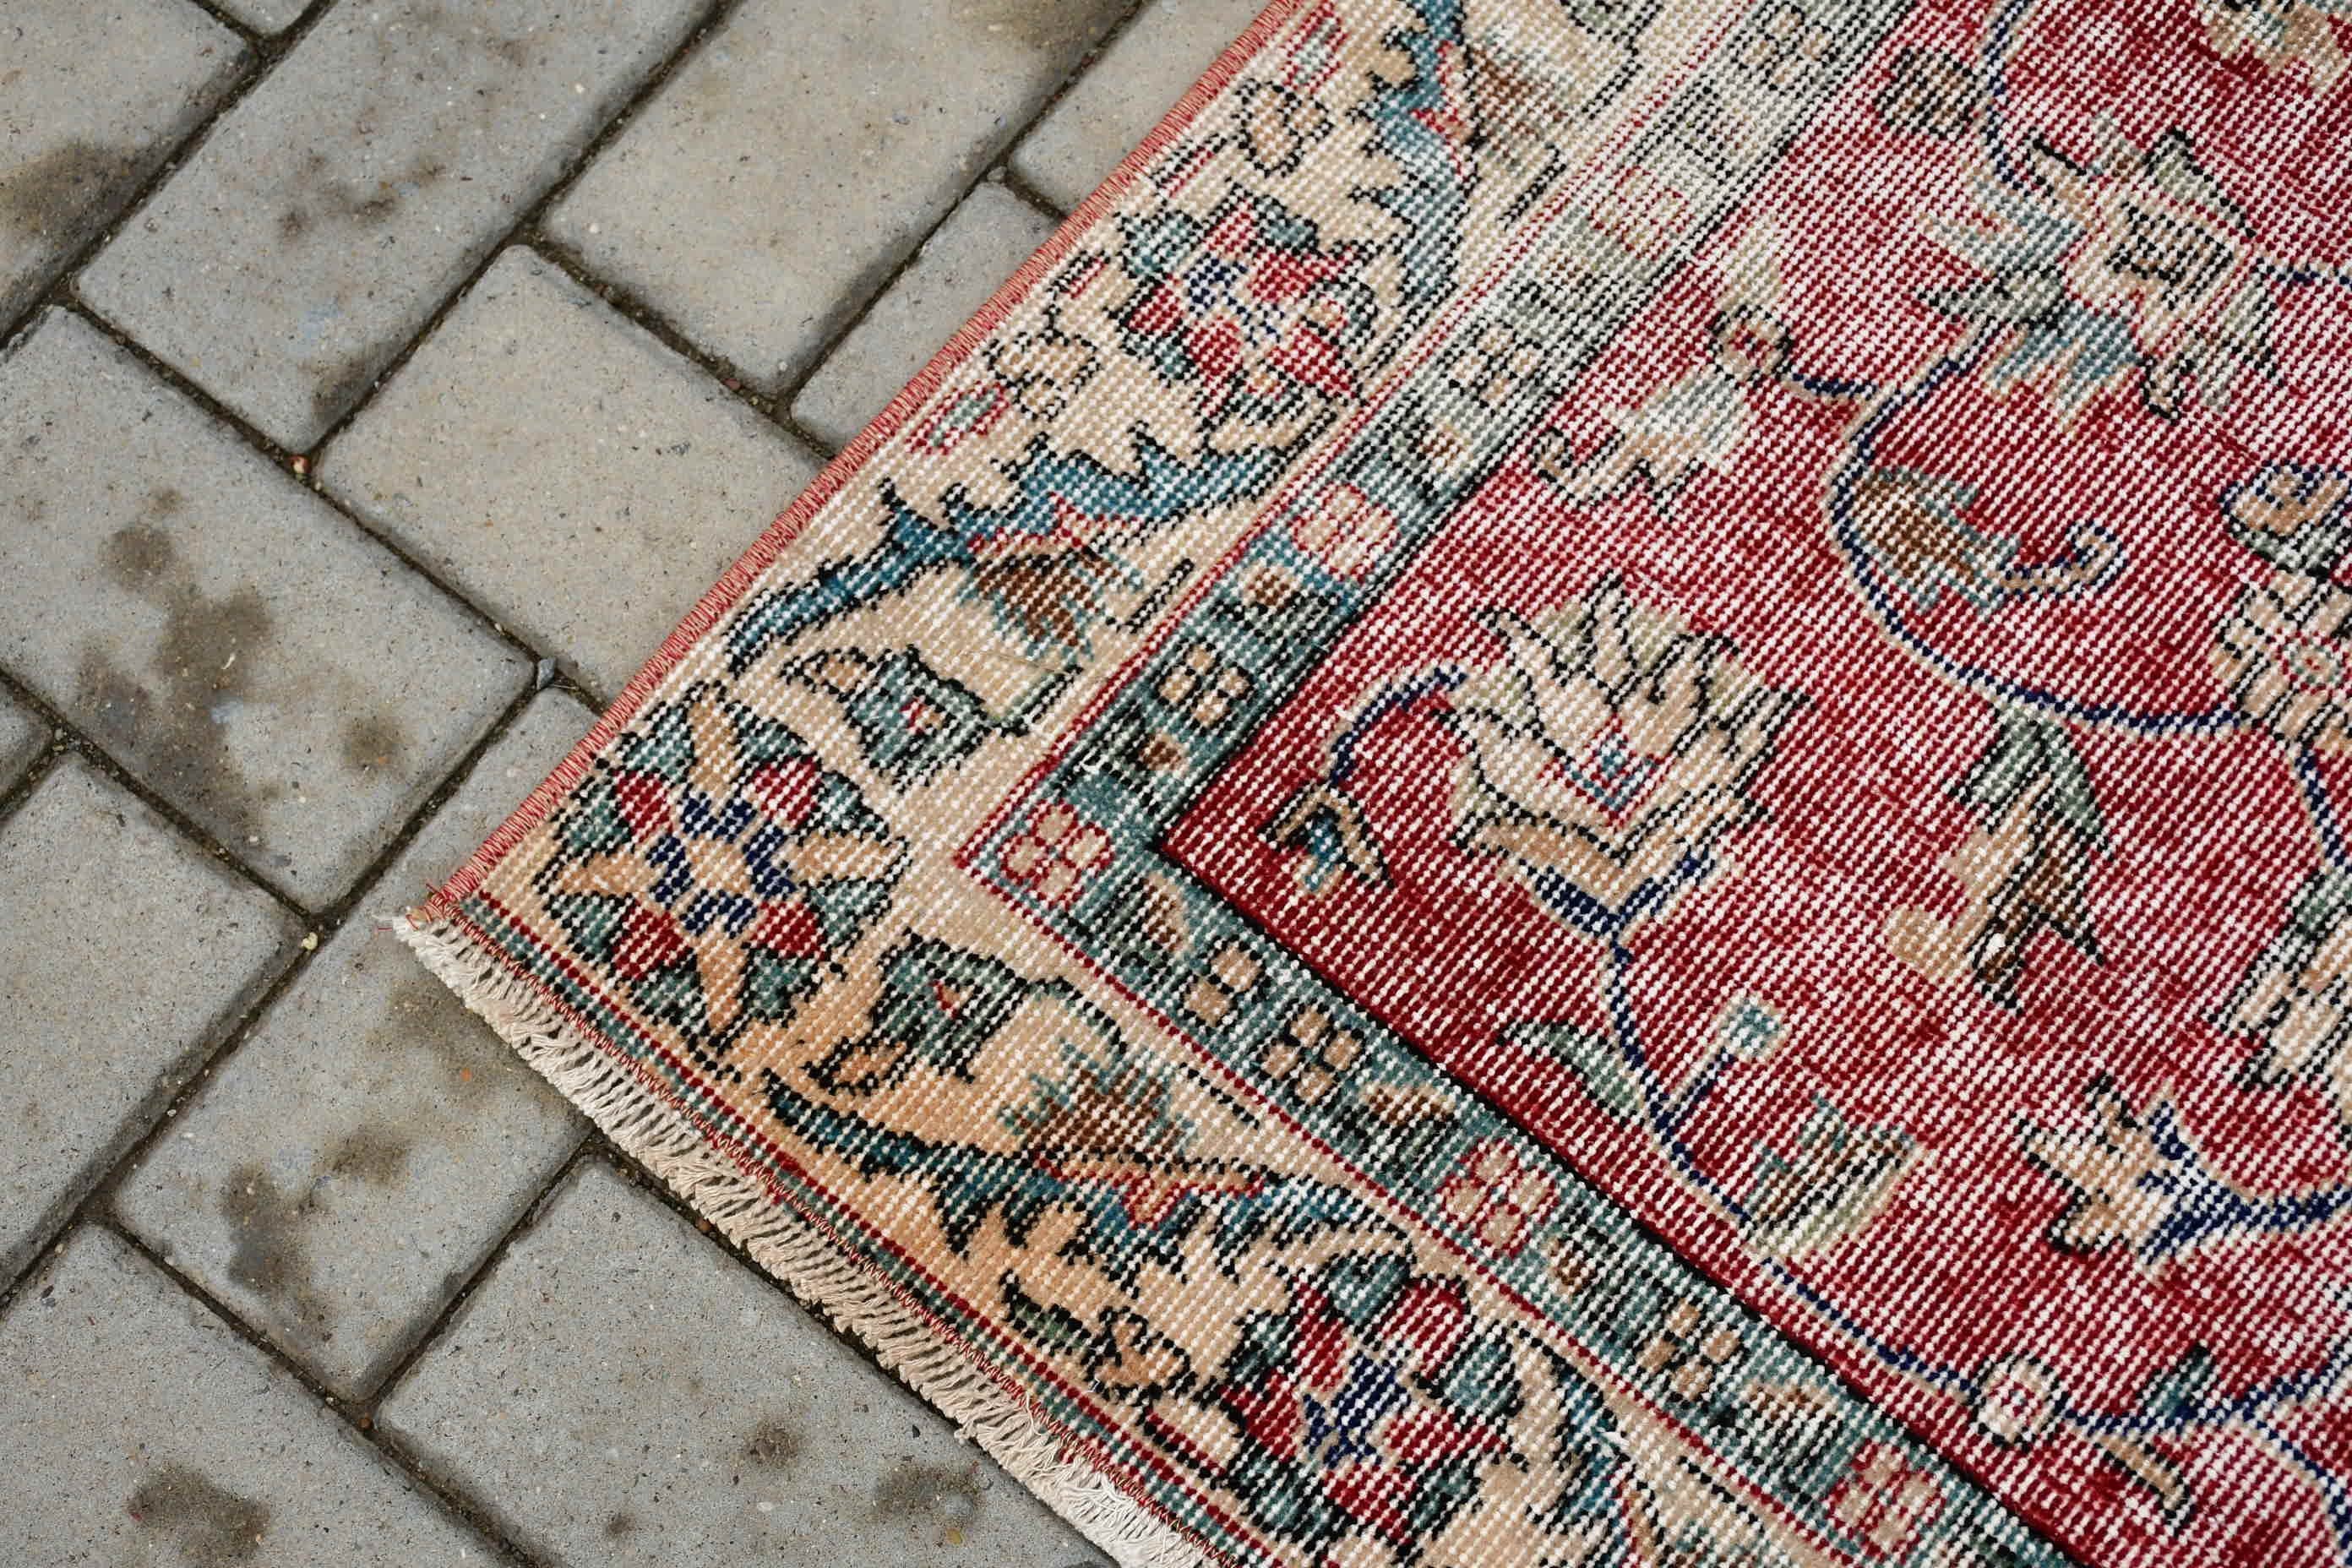 Turkish Rugs, Red Home Decor Rug, Floor Rug, Bedroom Rug, Vintage Rugs, Antique Rugs, 3.4x6.5 ft Accent Rug, Entry Rug